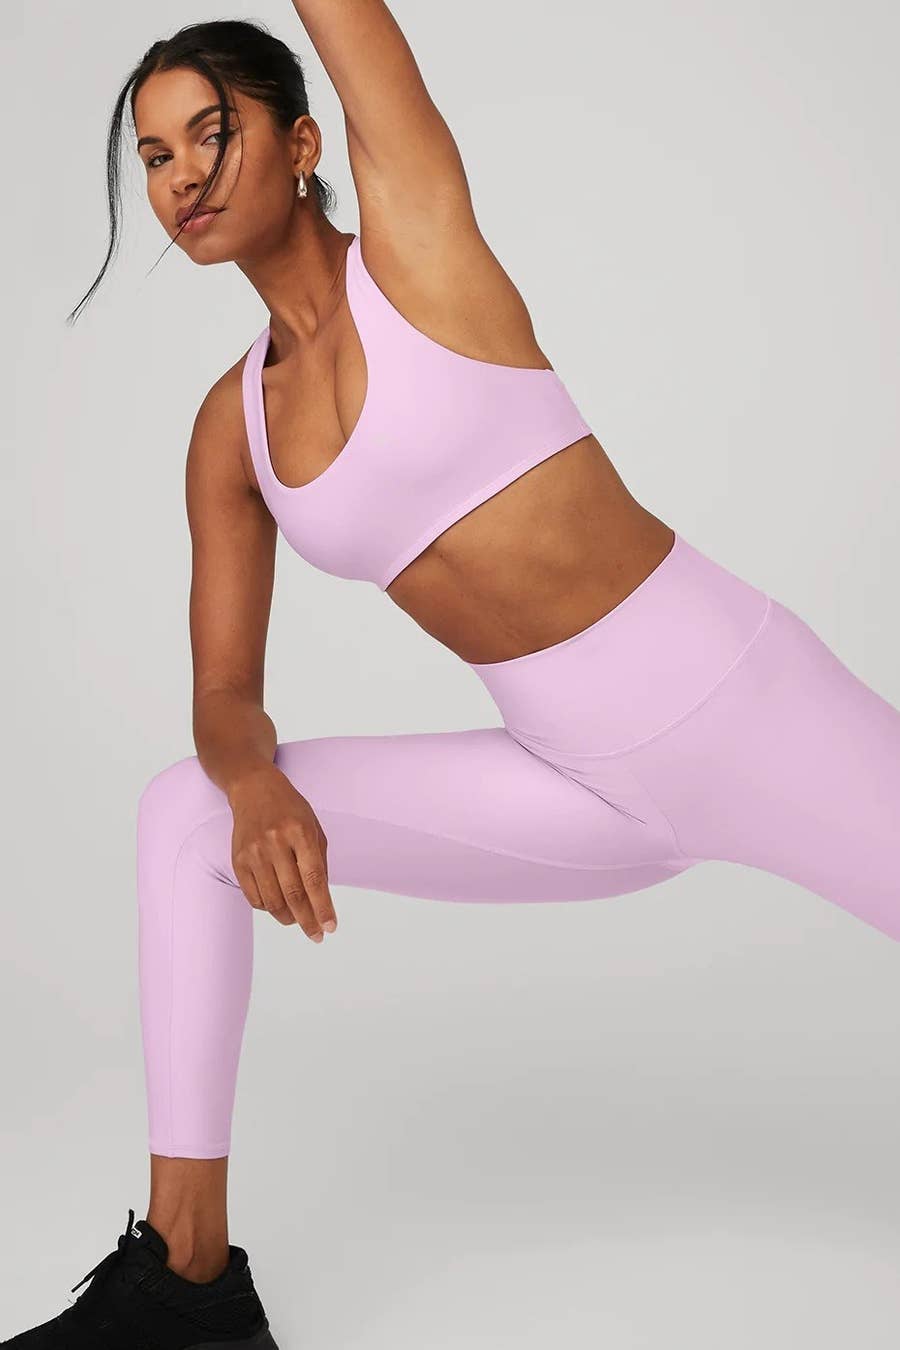 Pro-Fit Seamless Light Gray Sports Bra - $6 (60% Off Retail) - From Chloe